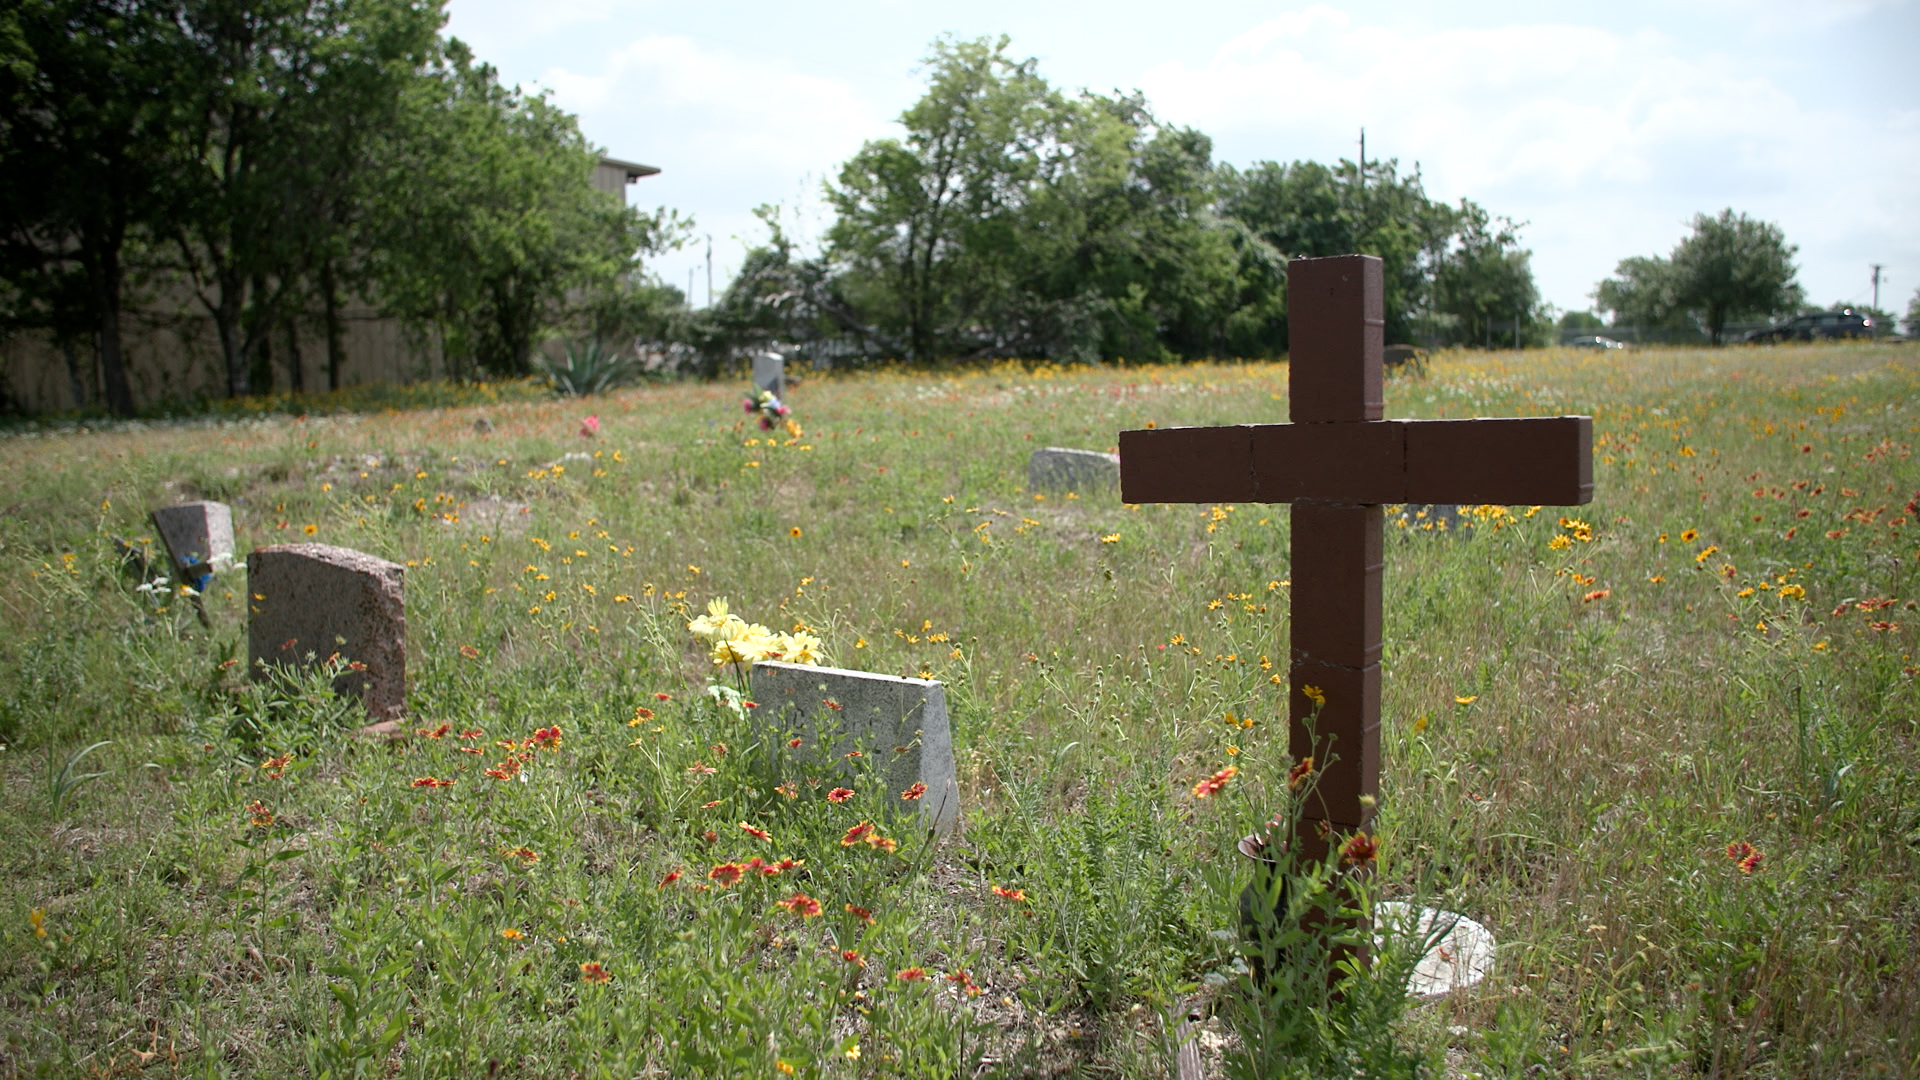 Three headstones and a brick cross mark the graves of those interred at the cemetery within the Pflugerville Colored Addition. As families have left the area, cemetery upkeep has fallen by the wayside, an issue seen across the country for historically Black cemeteries.